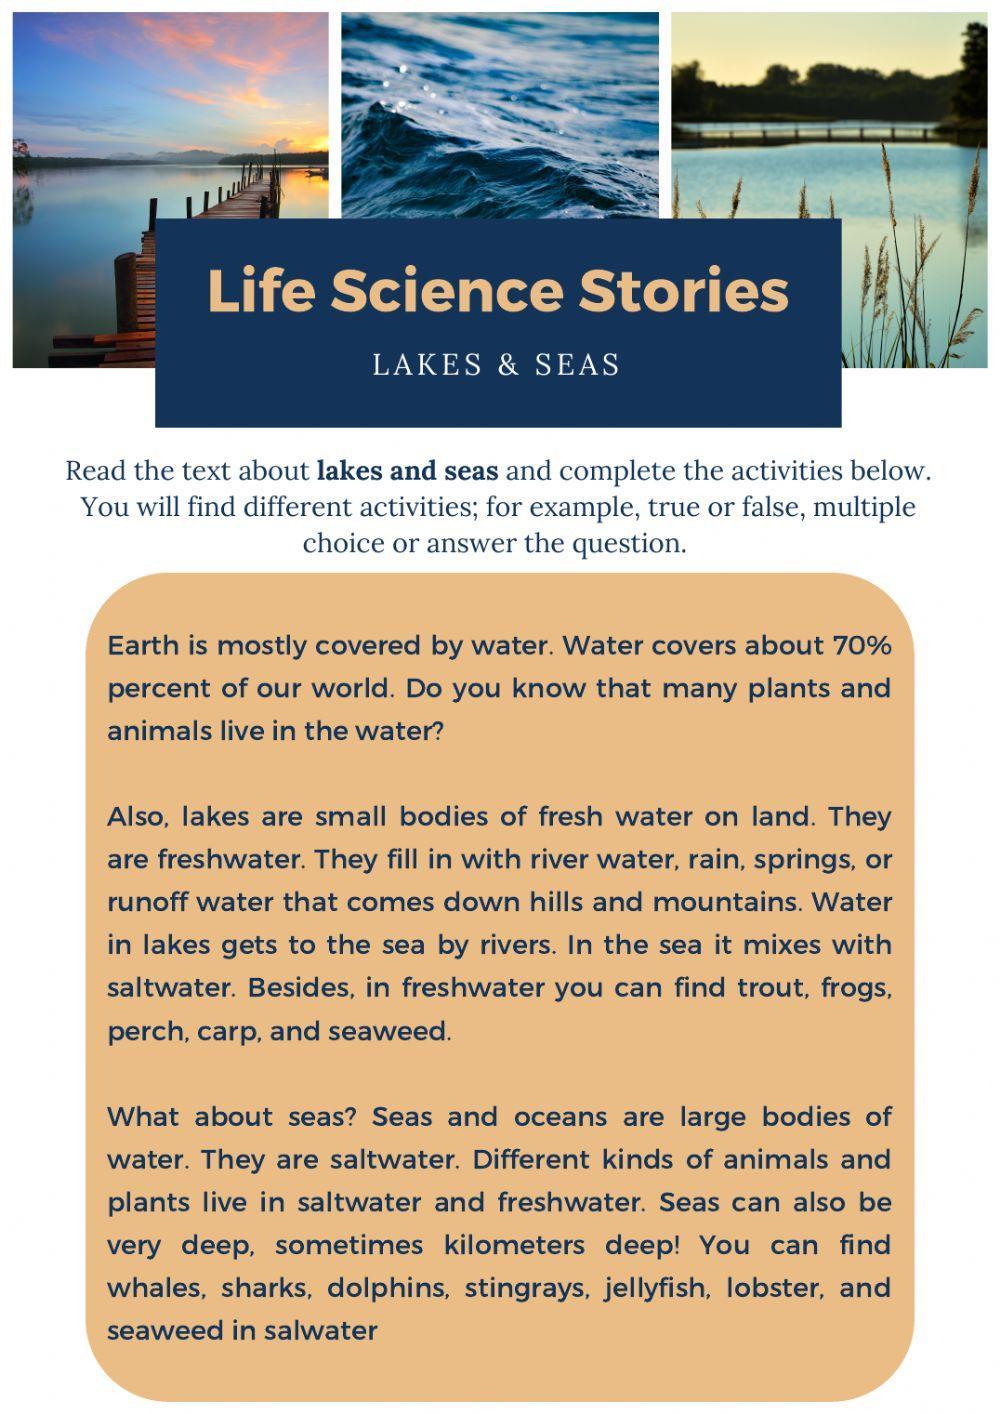 Life science - Seas and lakes